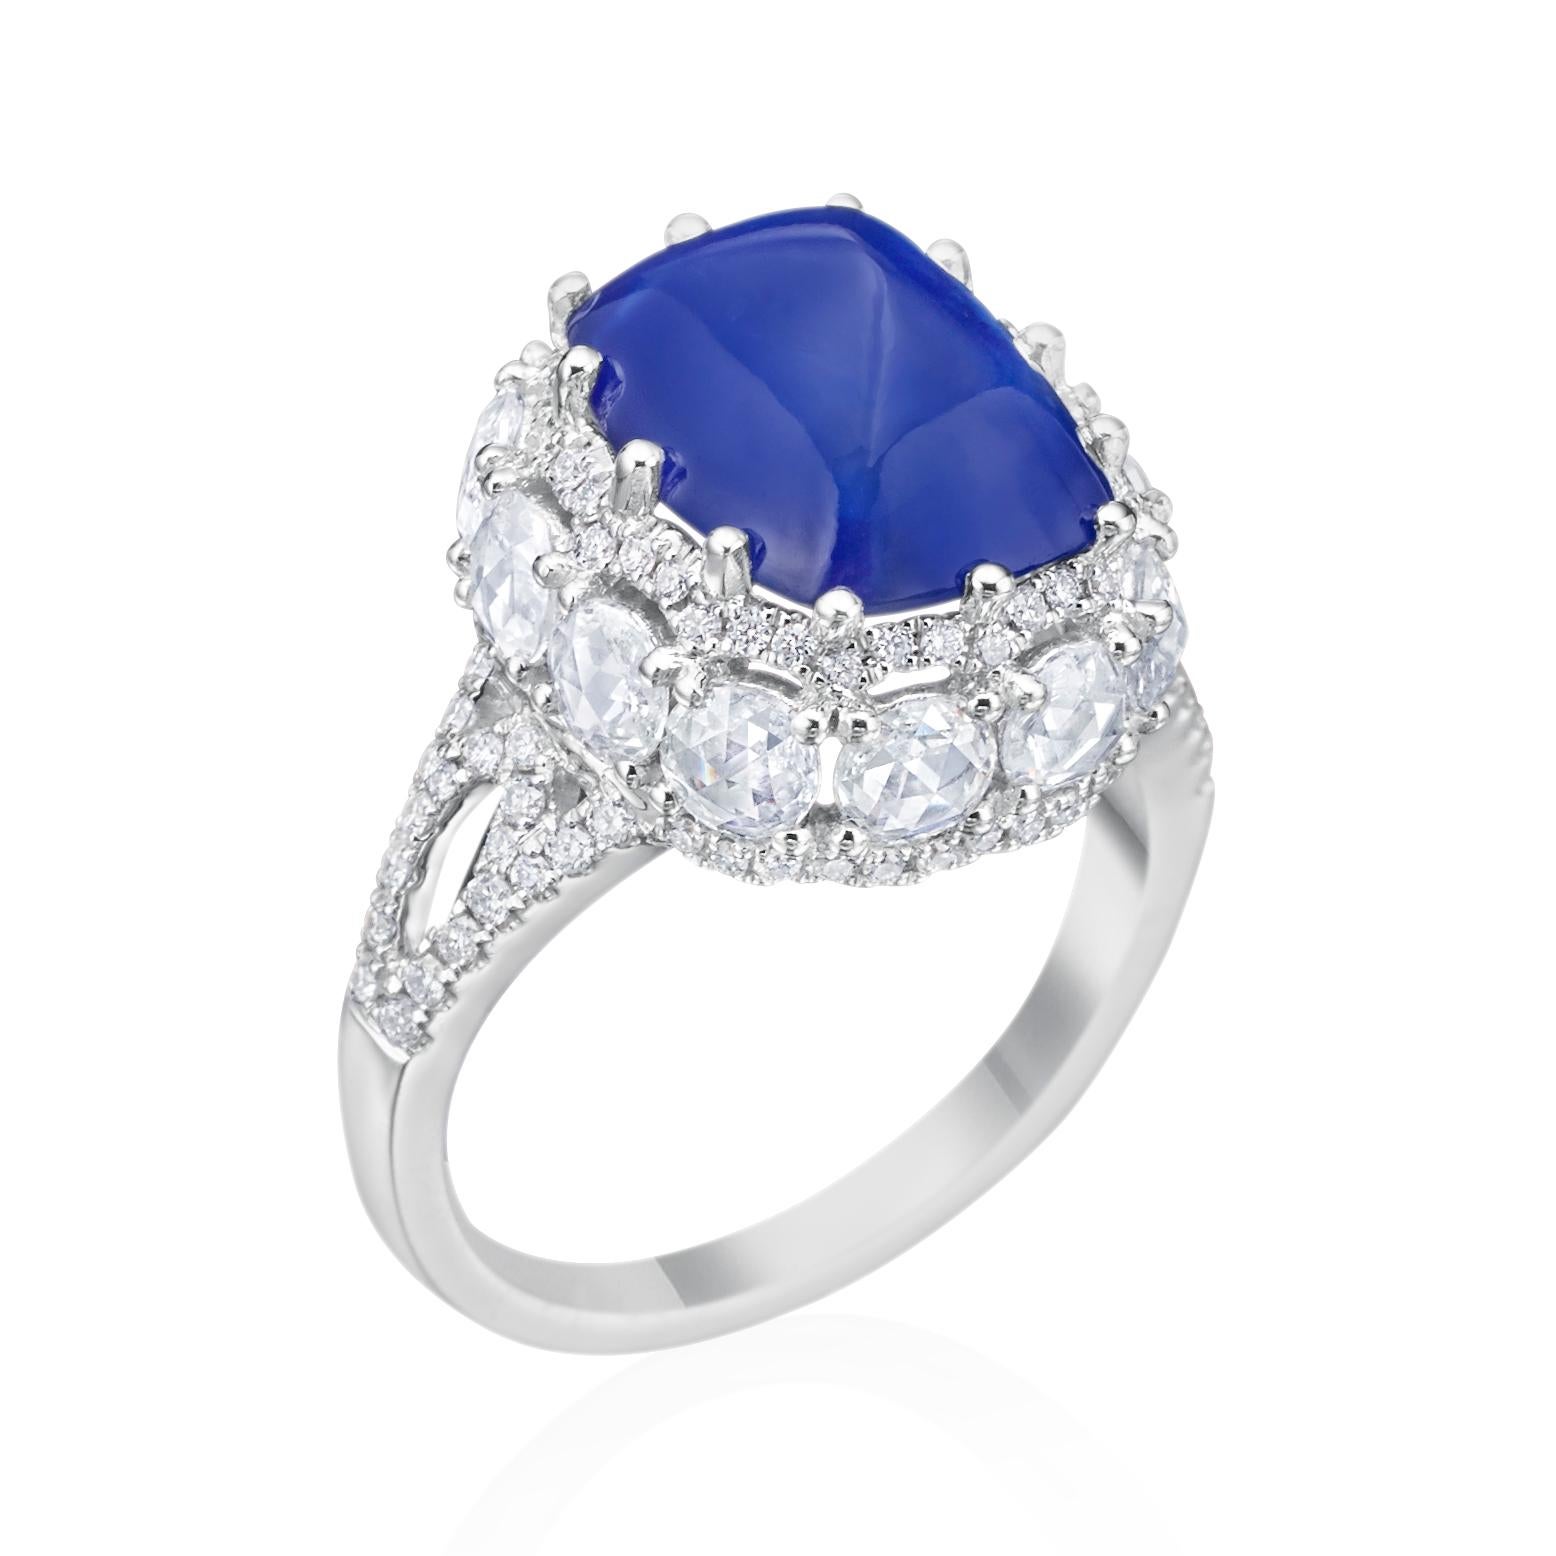 This dazzling 18K white gold diamond ring features a cushion sugar loaf cut blue Sapphire, that weighs 6.44 carats. Accenting this magnificent blue Sapphire, are twelve round rose cut diamonds weighing 1.23 carat with G-H color and VS clarity. The